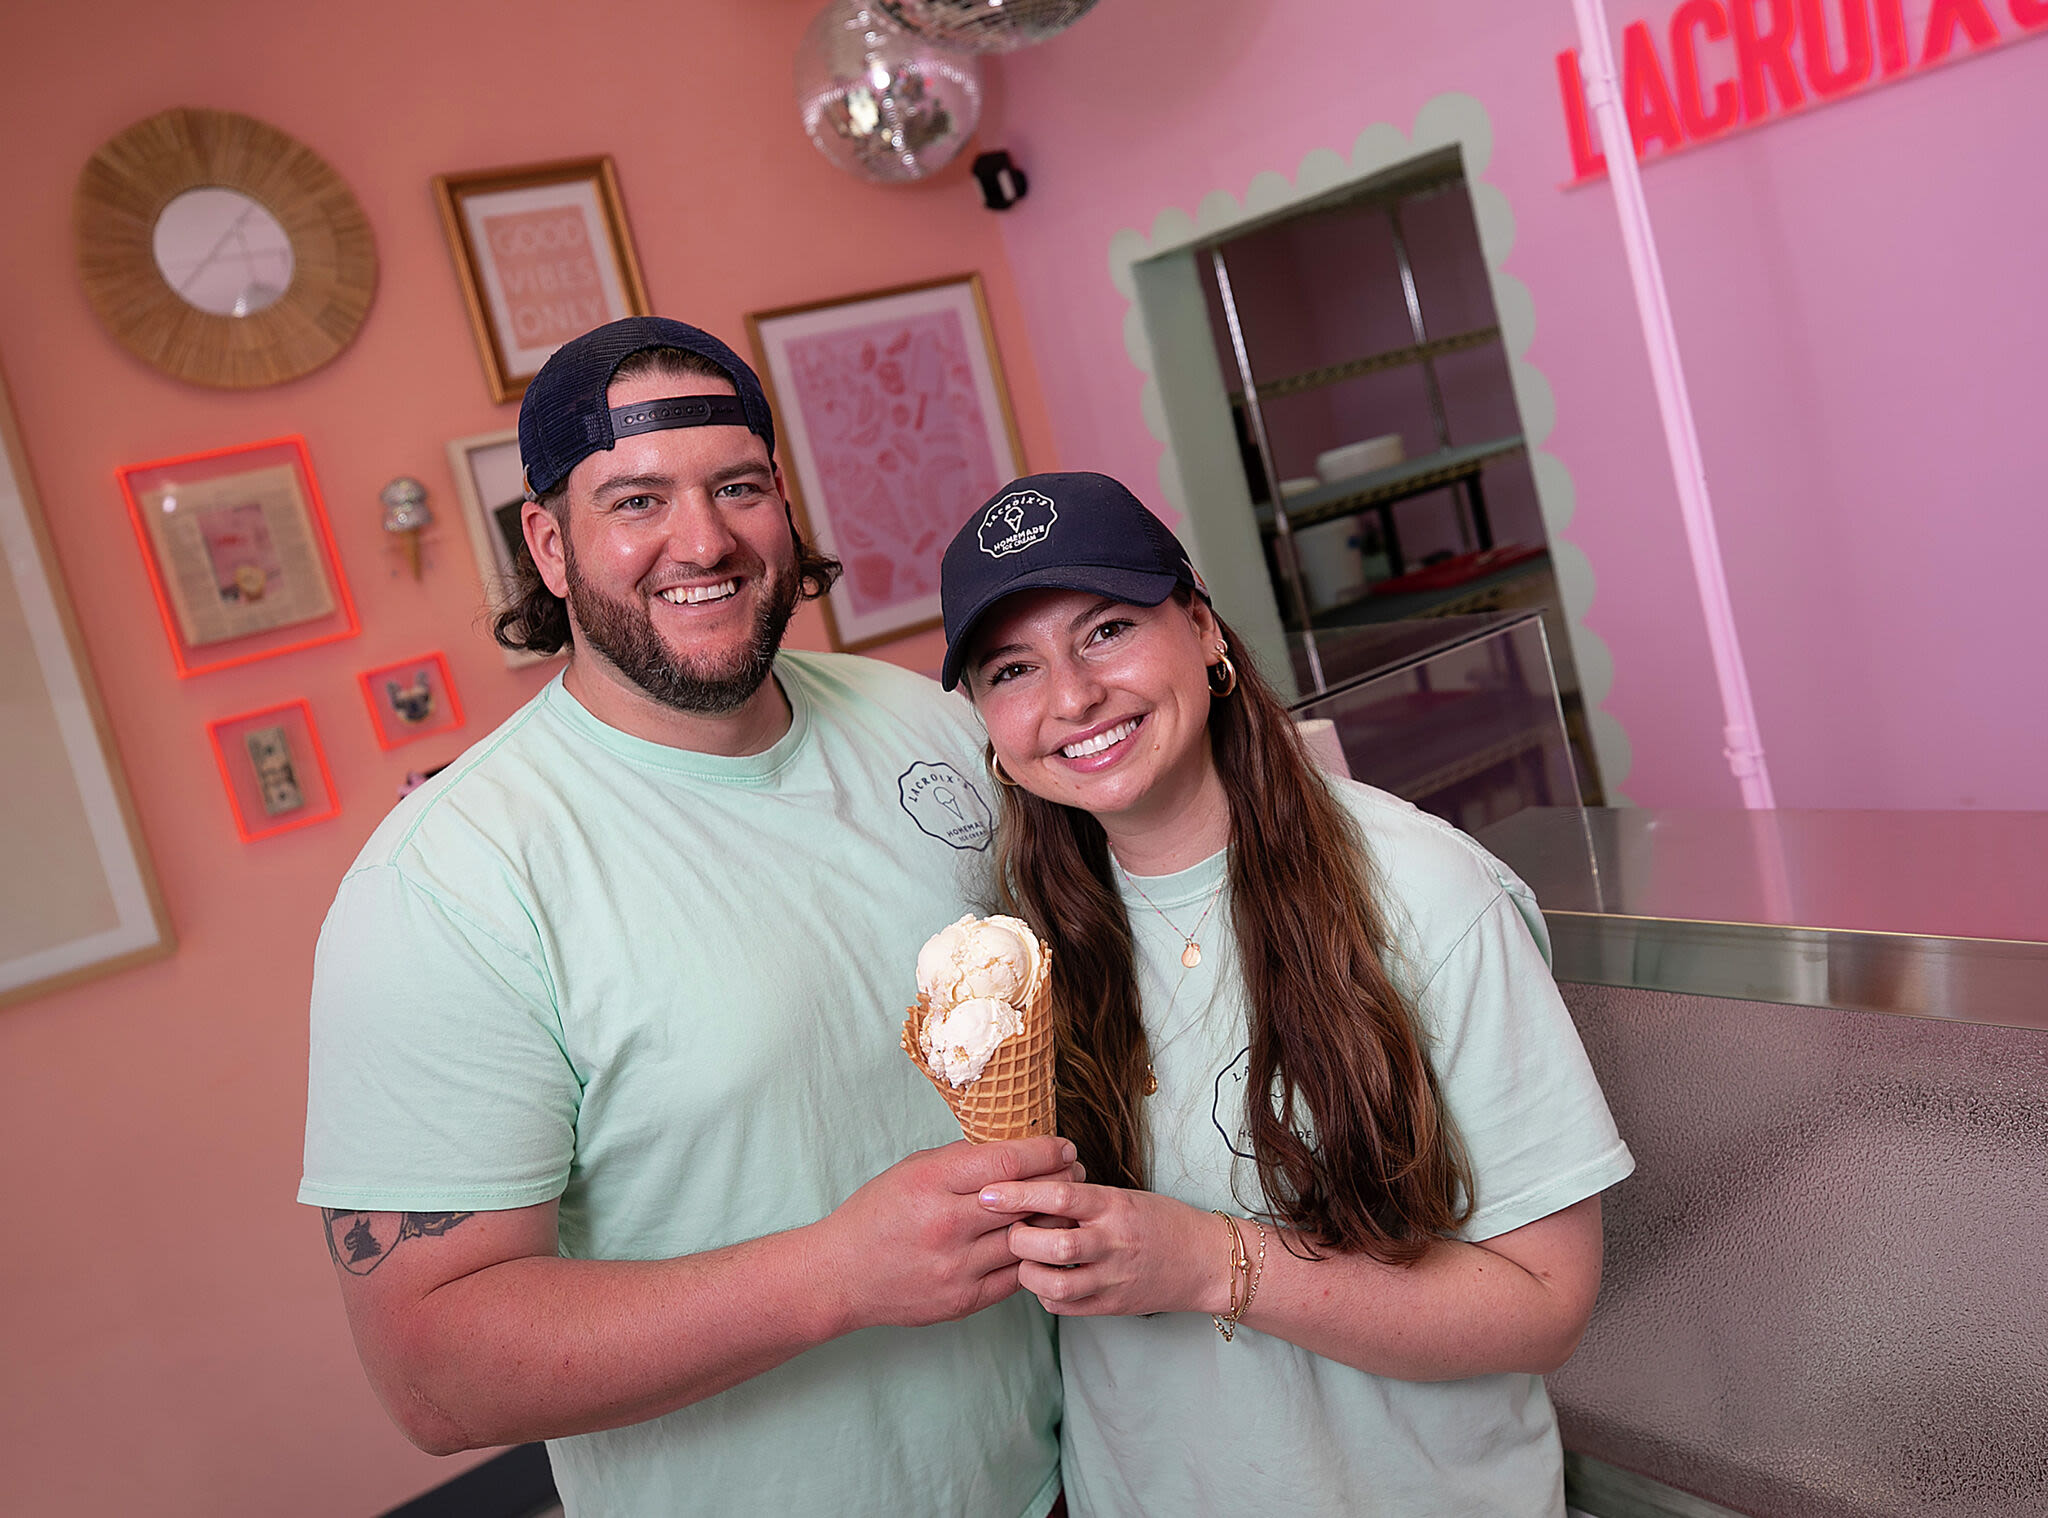 Couple moves from Stamford to Plainville to open ice cream business